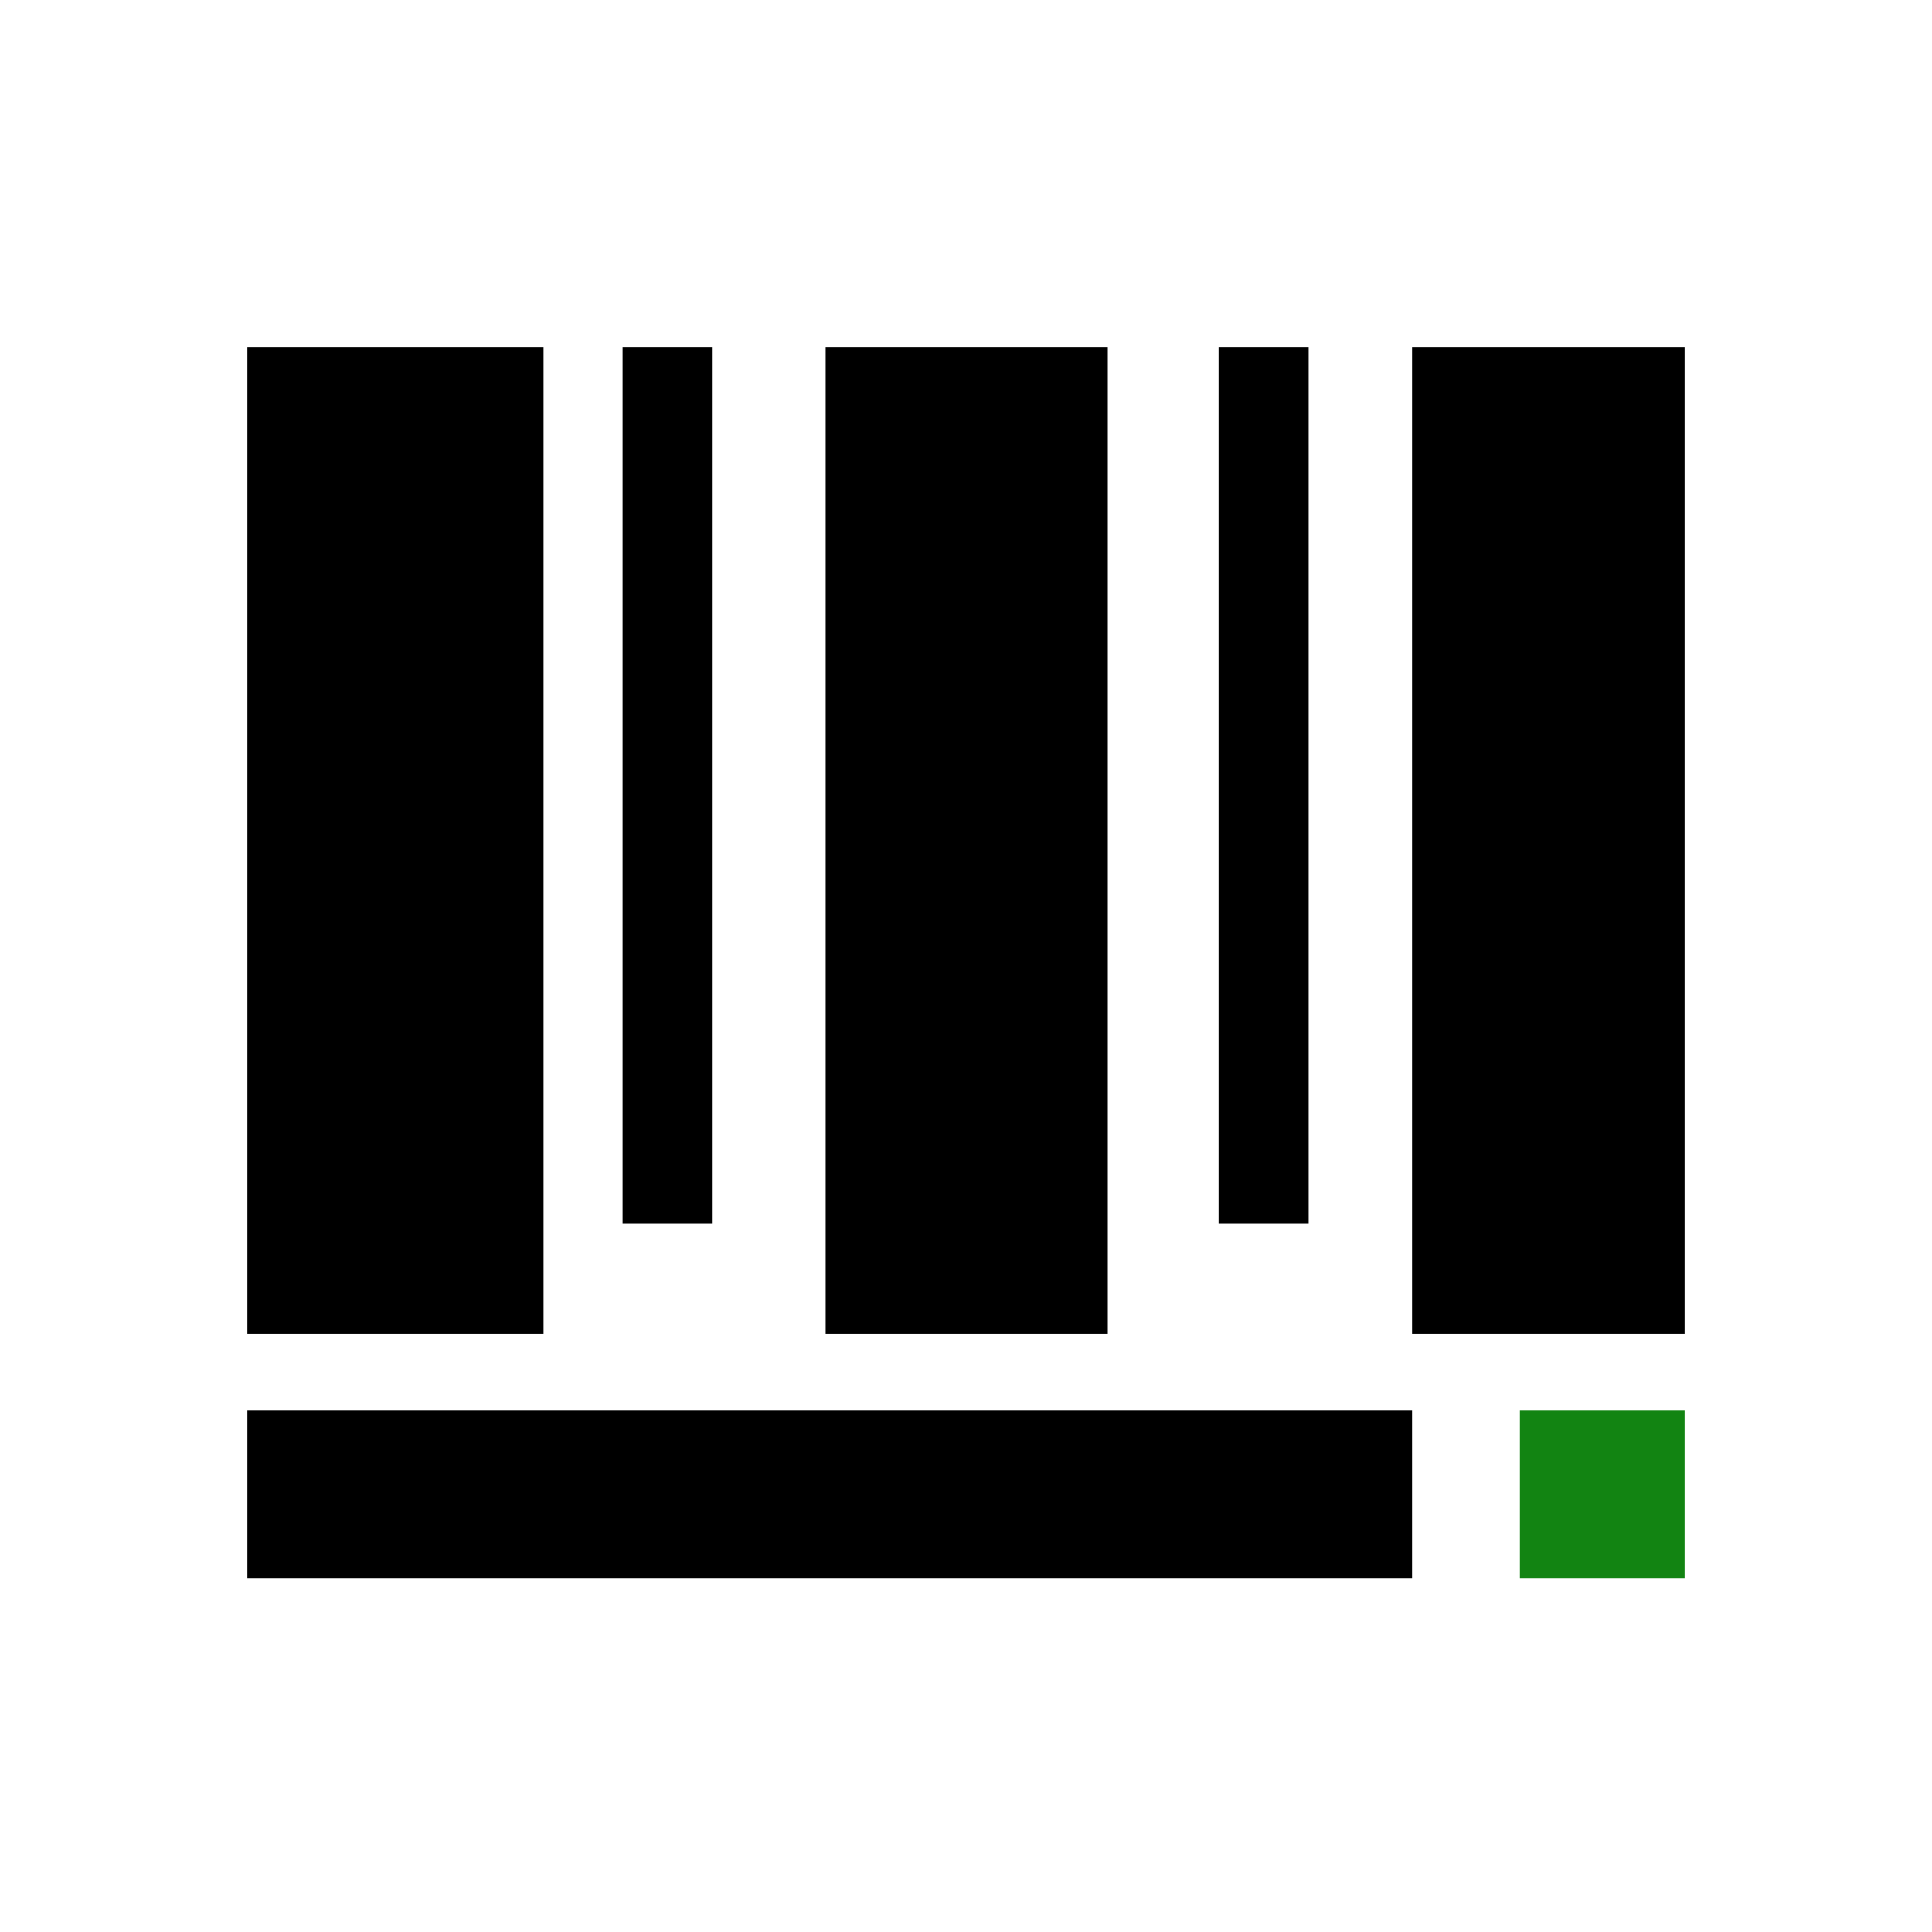 EAN-8 barcode Android logo